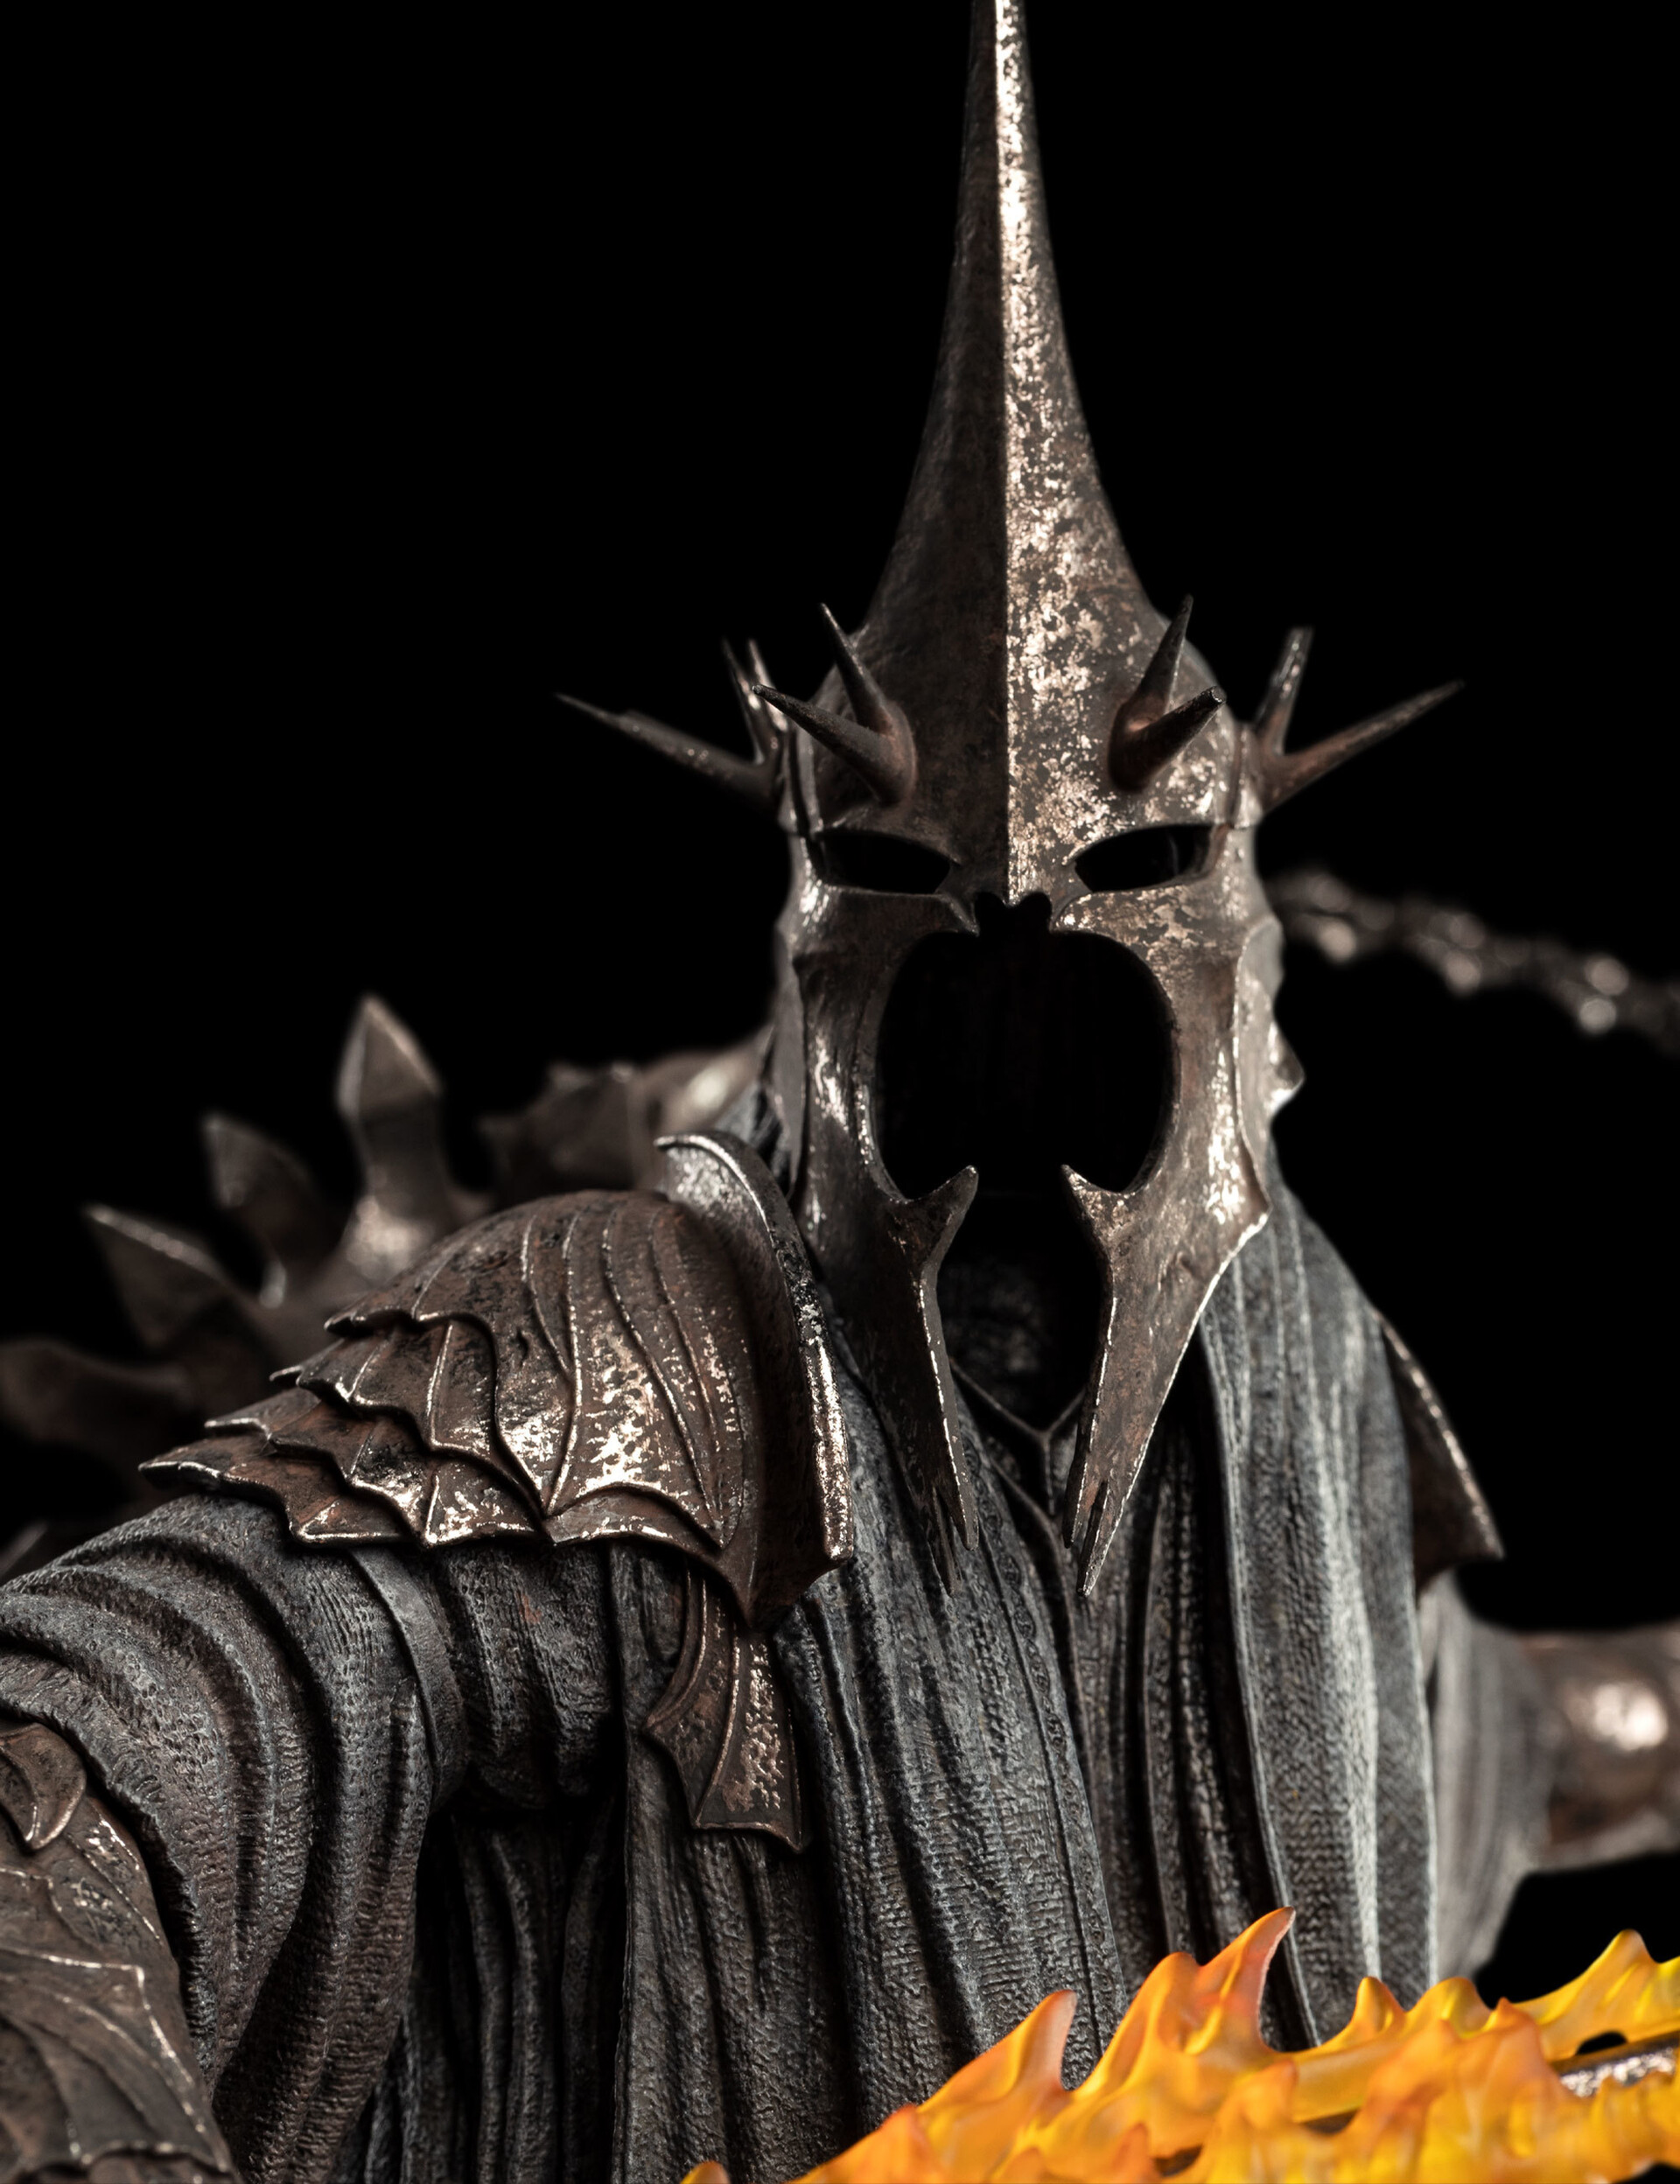 THE WITCH-KING OF ANGMAR - Figures of Fandom.